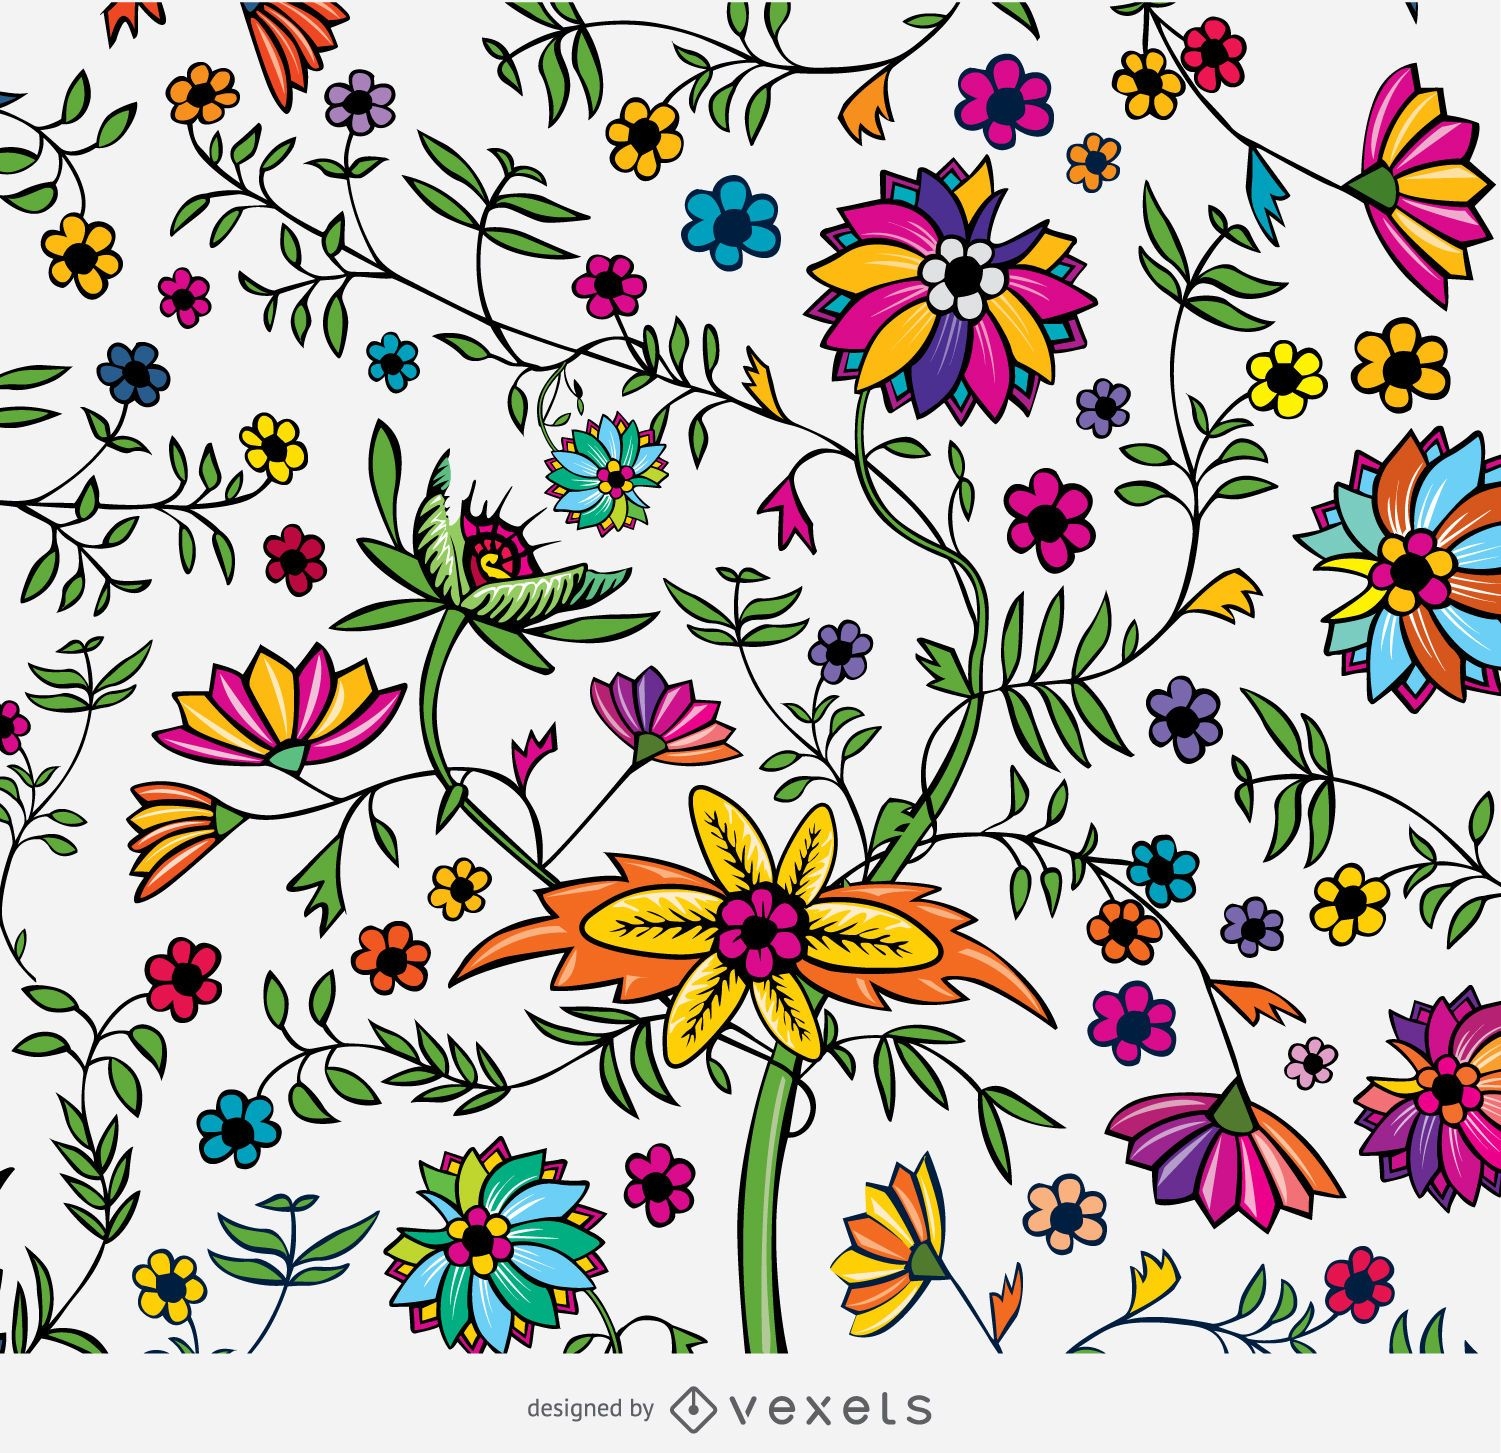 floral patterns and designs